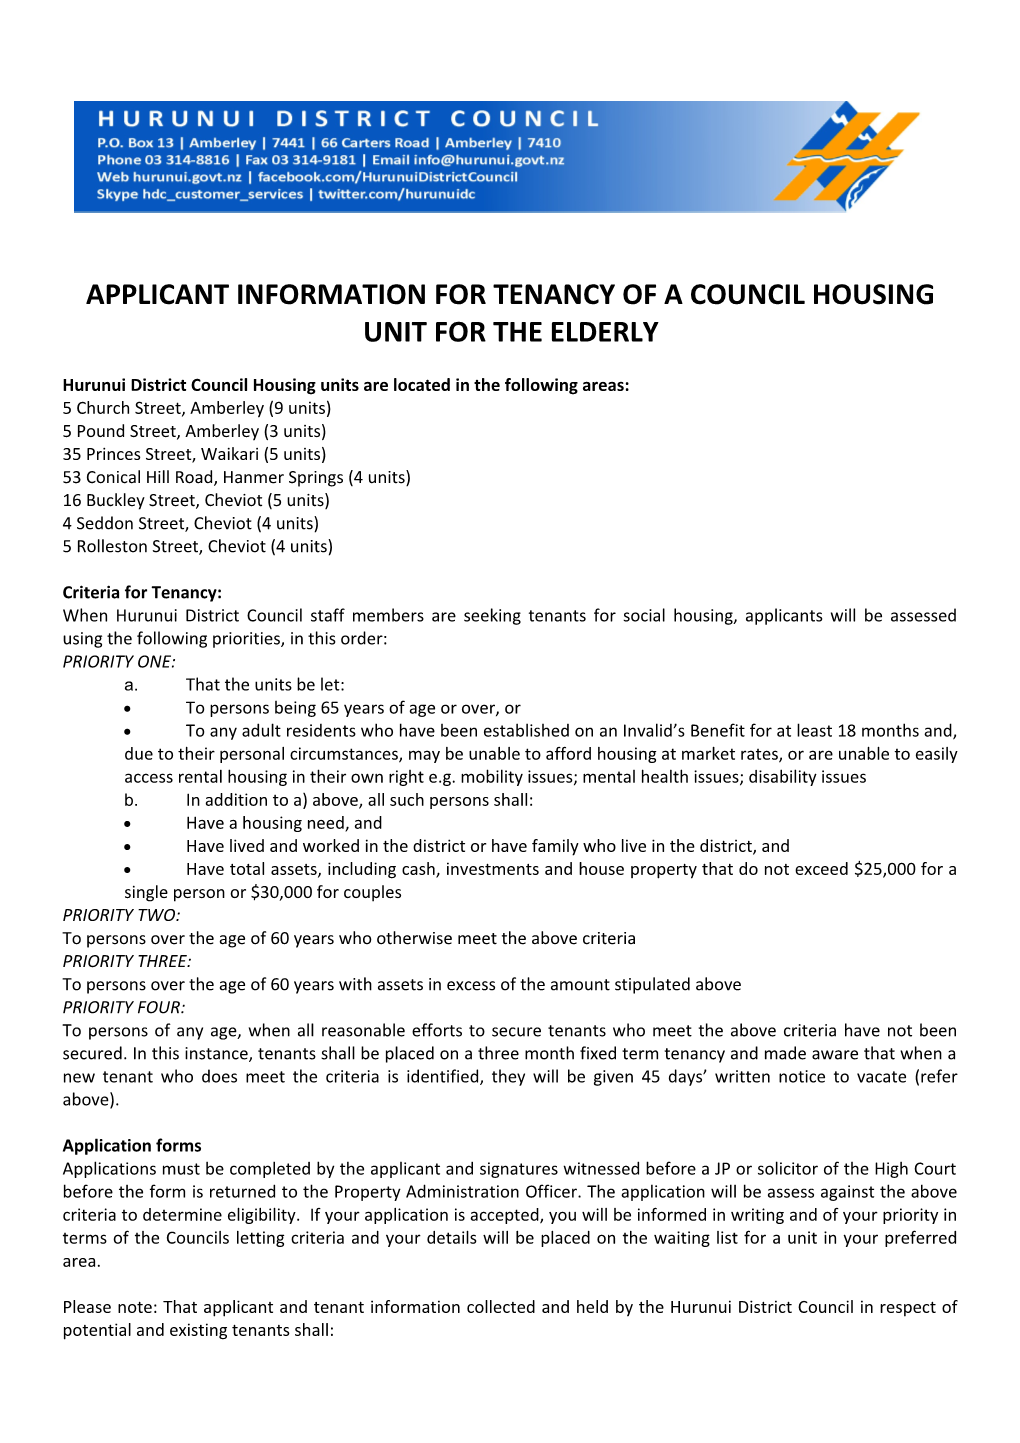 Applicant Information for Tenancy of a Council Housing Unit for the Elderly